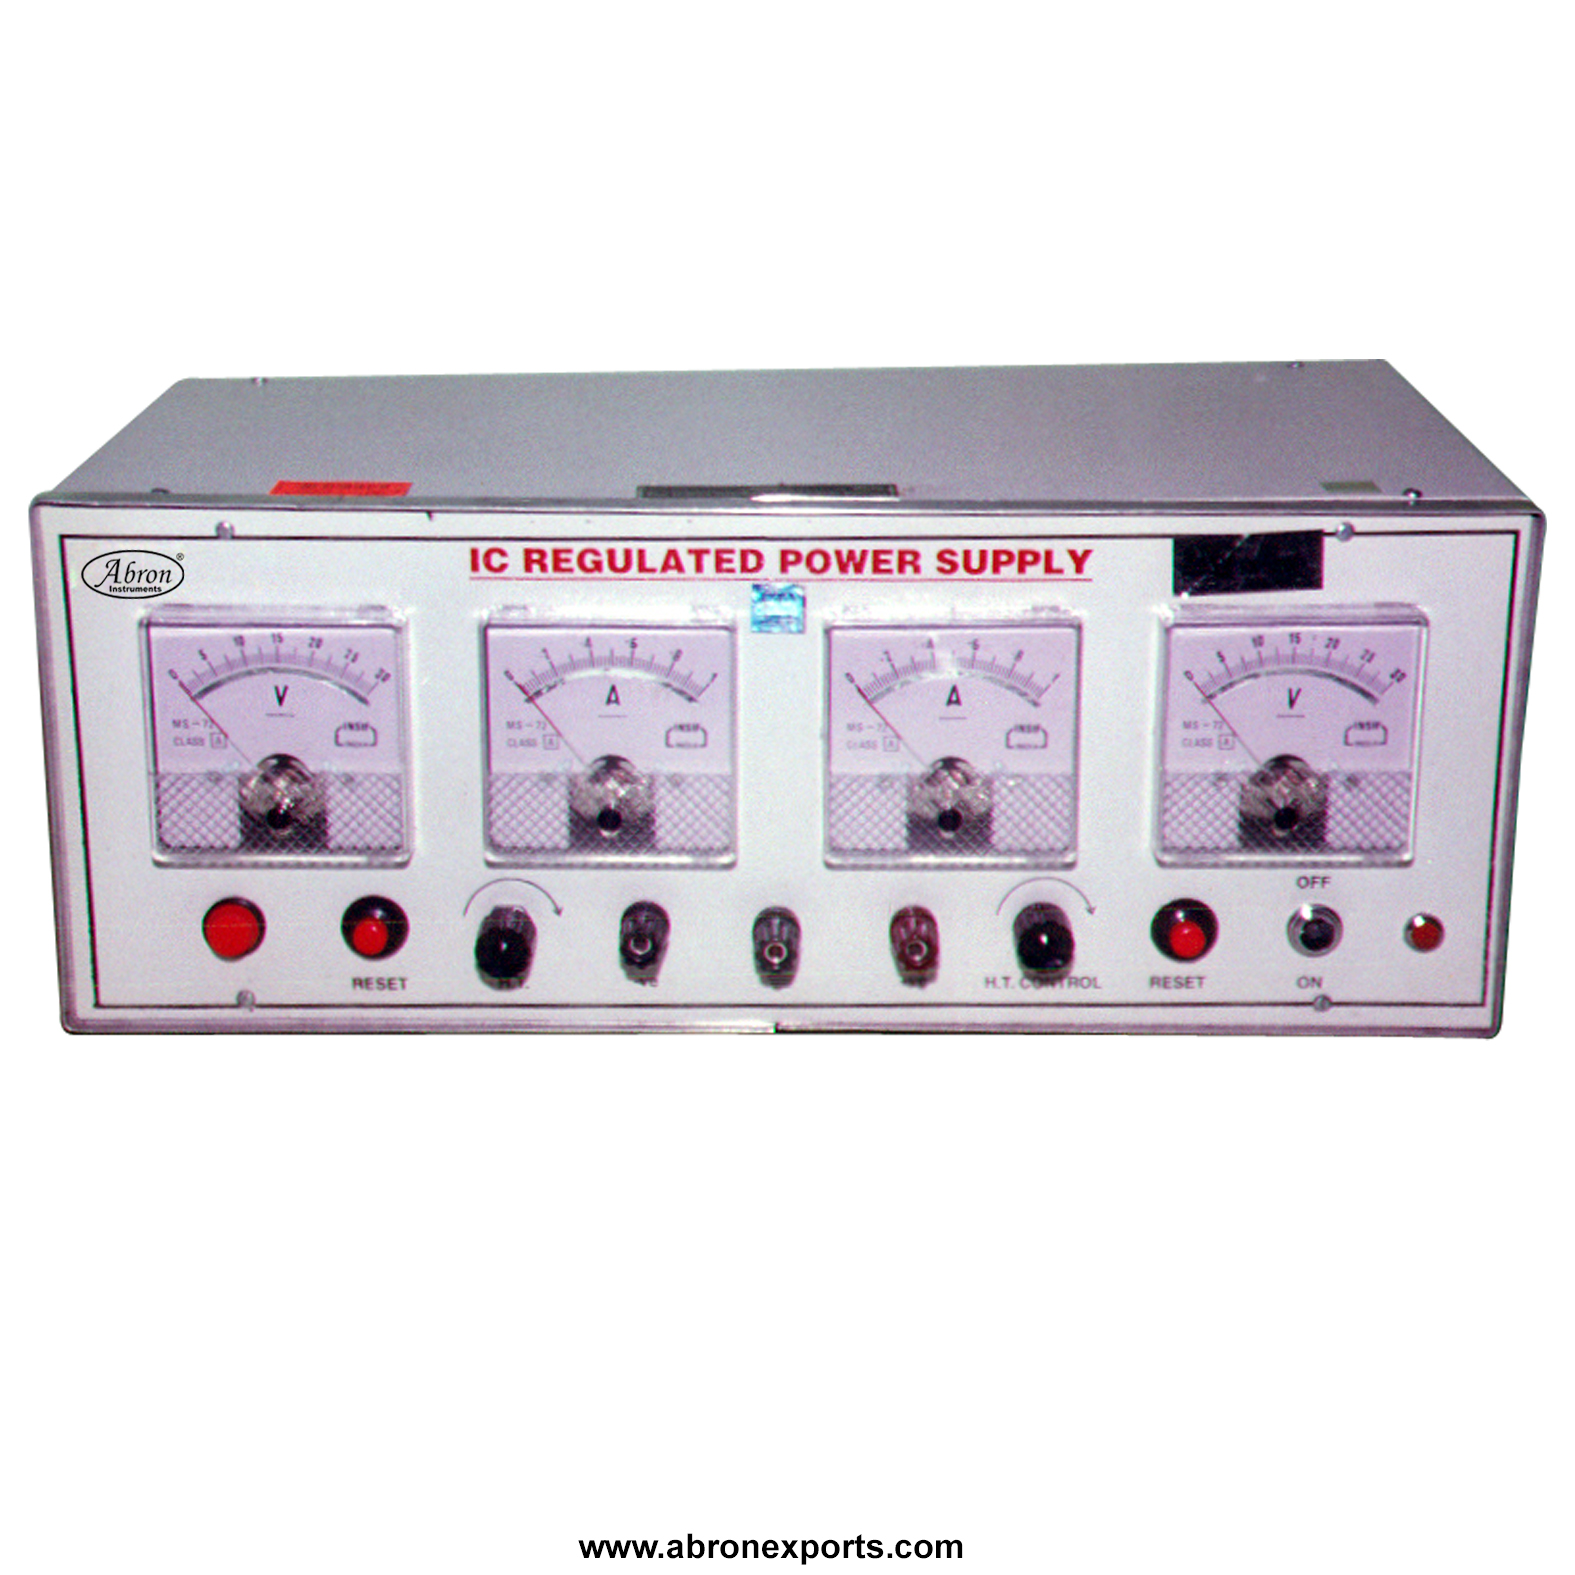 Power supply IC regulated 15 0 15v dc variable HT short circuit protection 4 meter dial VA abron AE-1375-c2